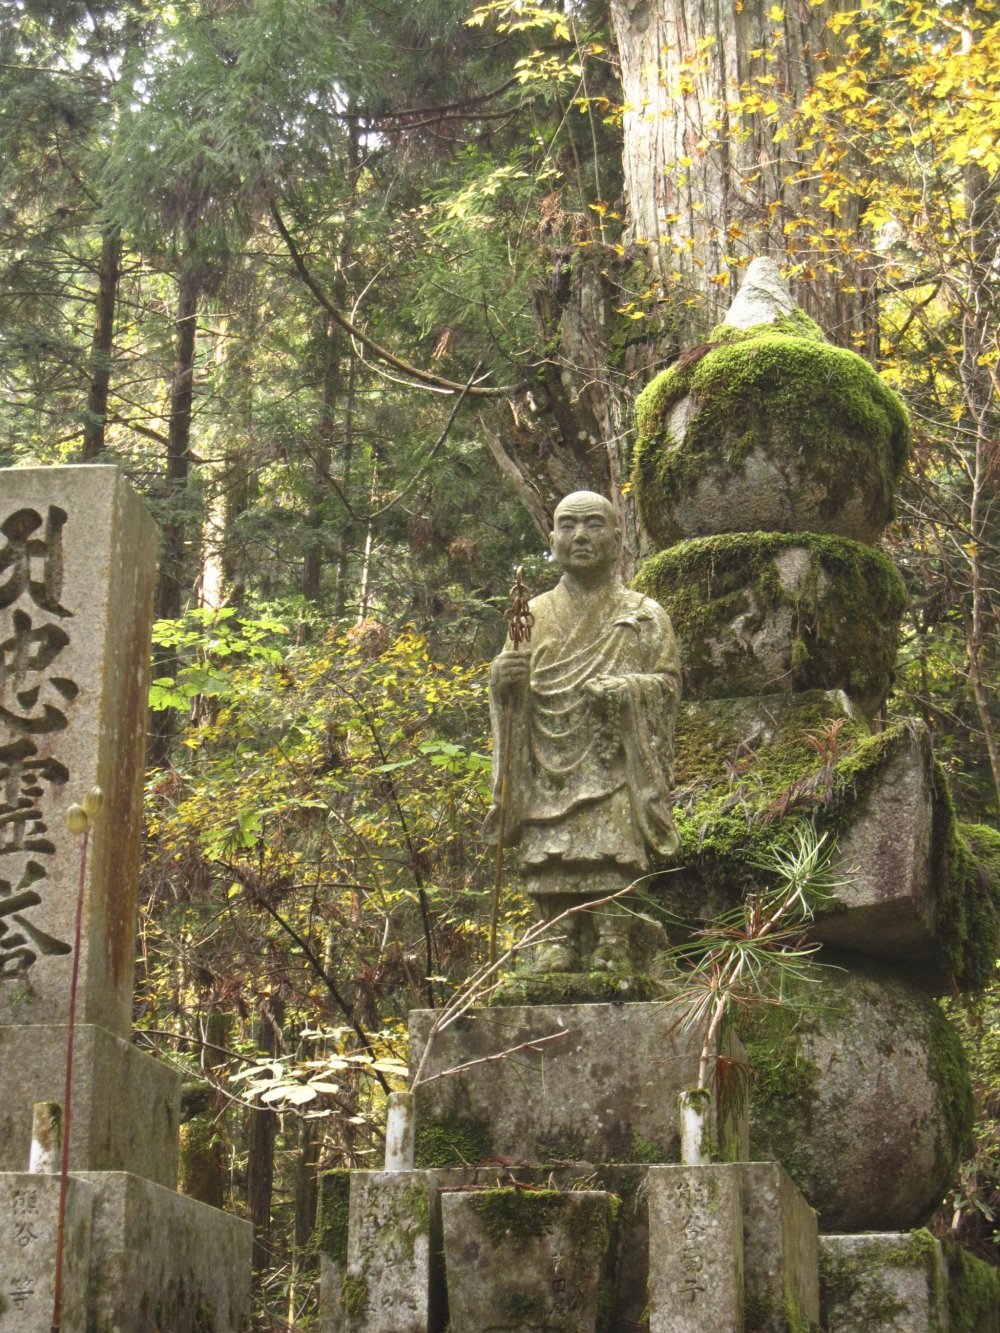 Kukai (posthumously named Kobo Daishi), the founder of Shingon&nbsp;Buddhism, is one of the most revered historical figures in Japan